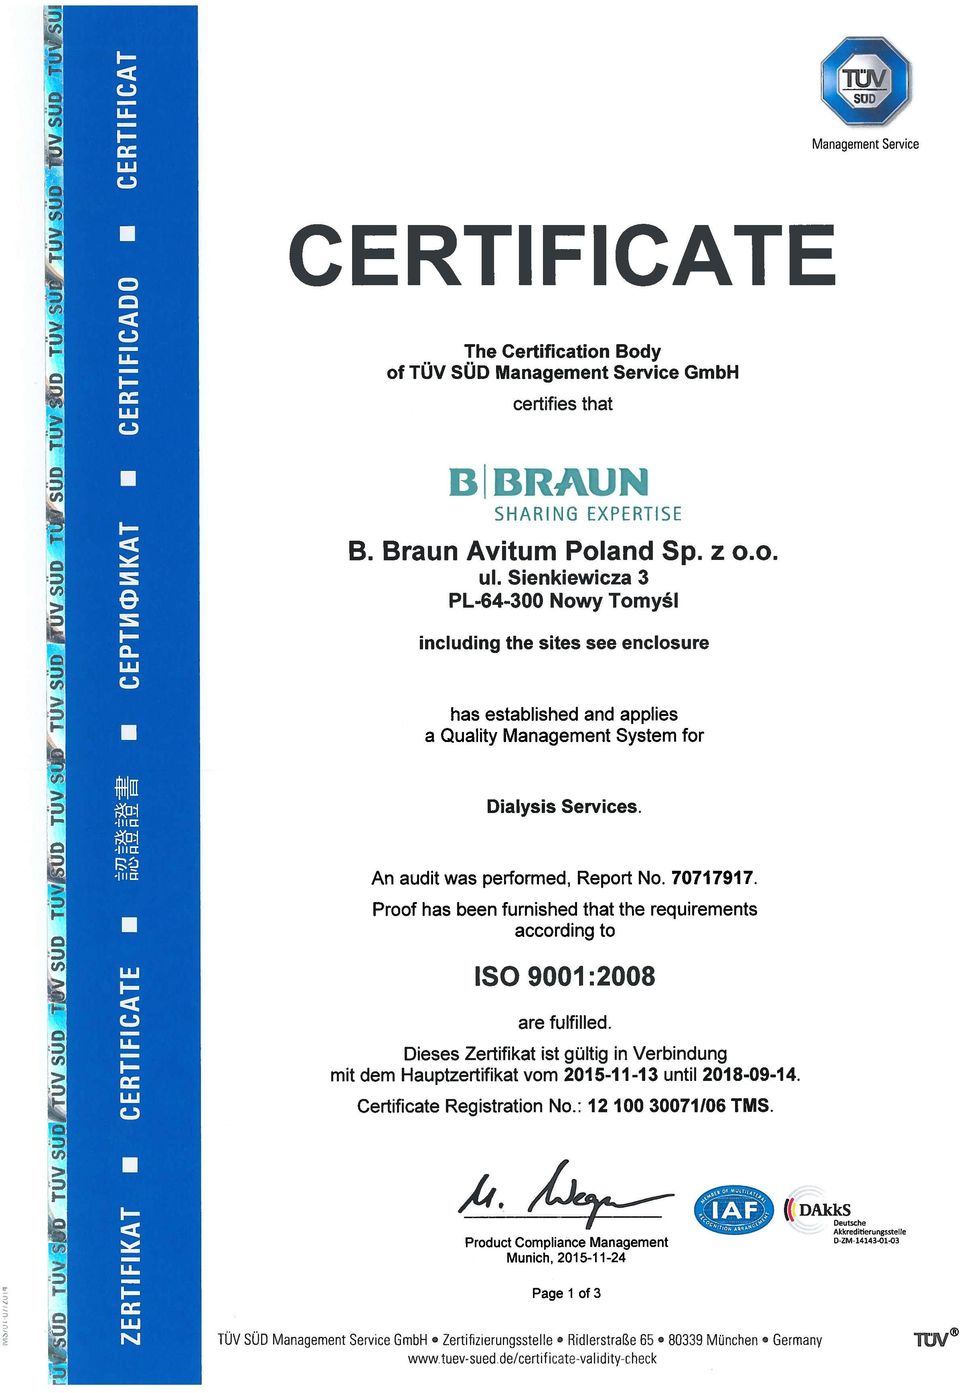 Proof has been furnished that the requírements according to ISO 9001:2008 are fulfilled. Dieses Zertifikat st gültig n Verbindung mit dem Hauptzertifikat vom 2015-11-13 unui 2018-09-14.